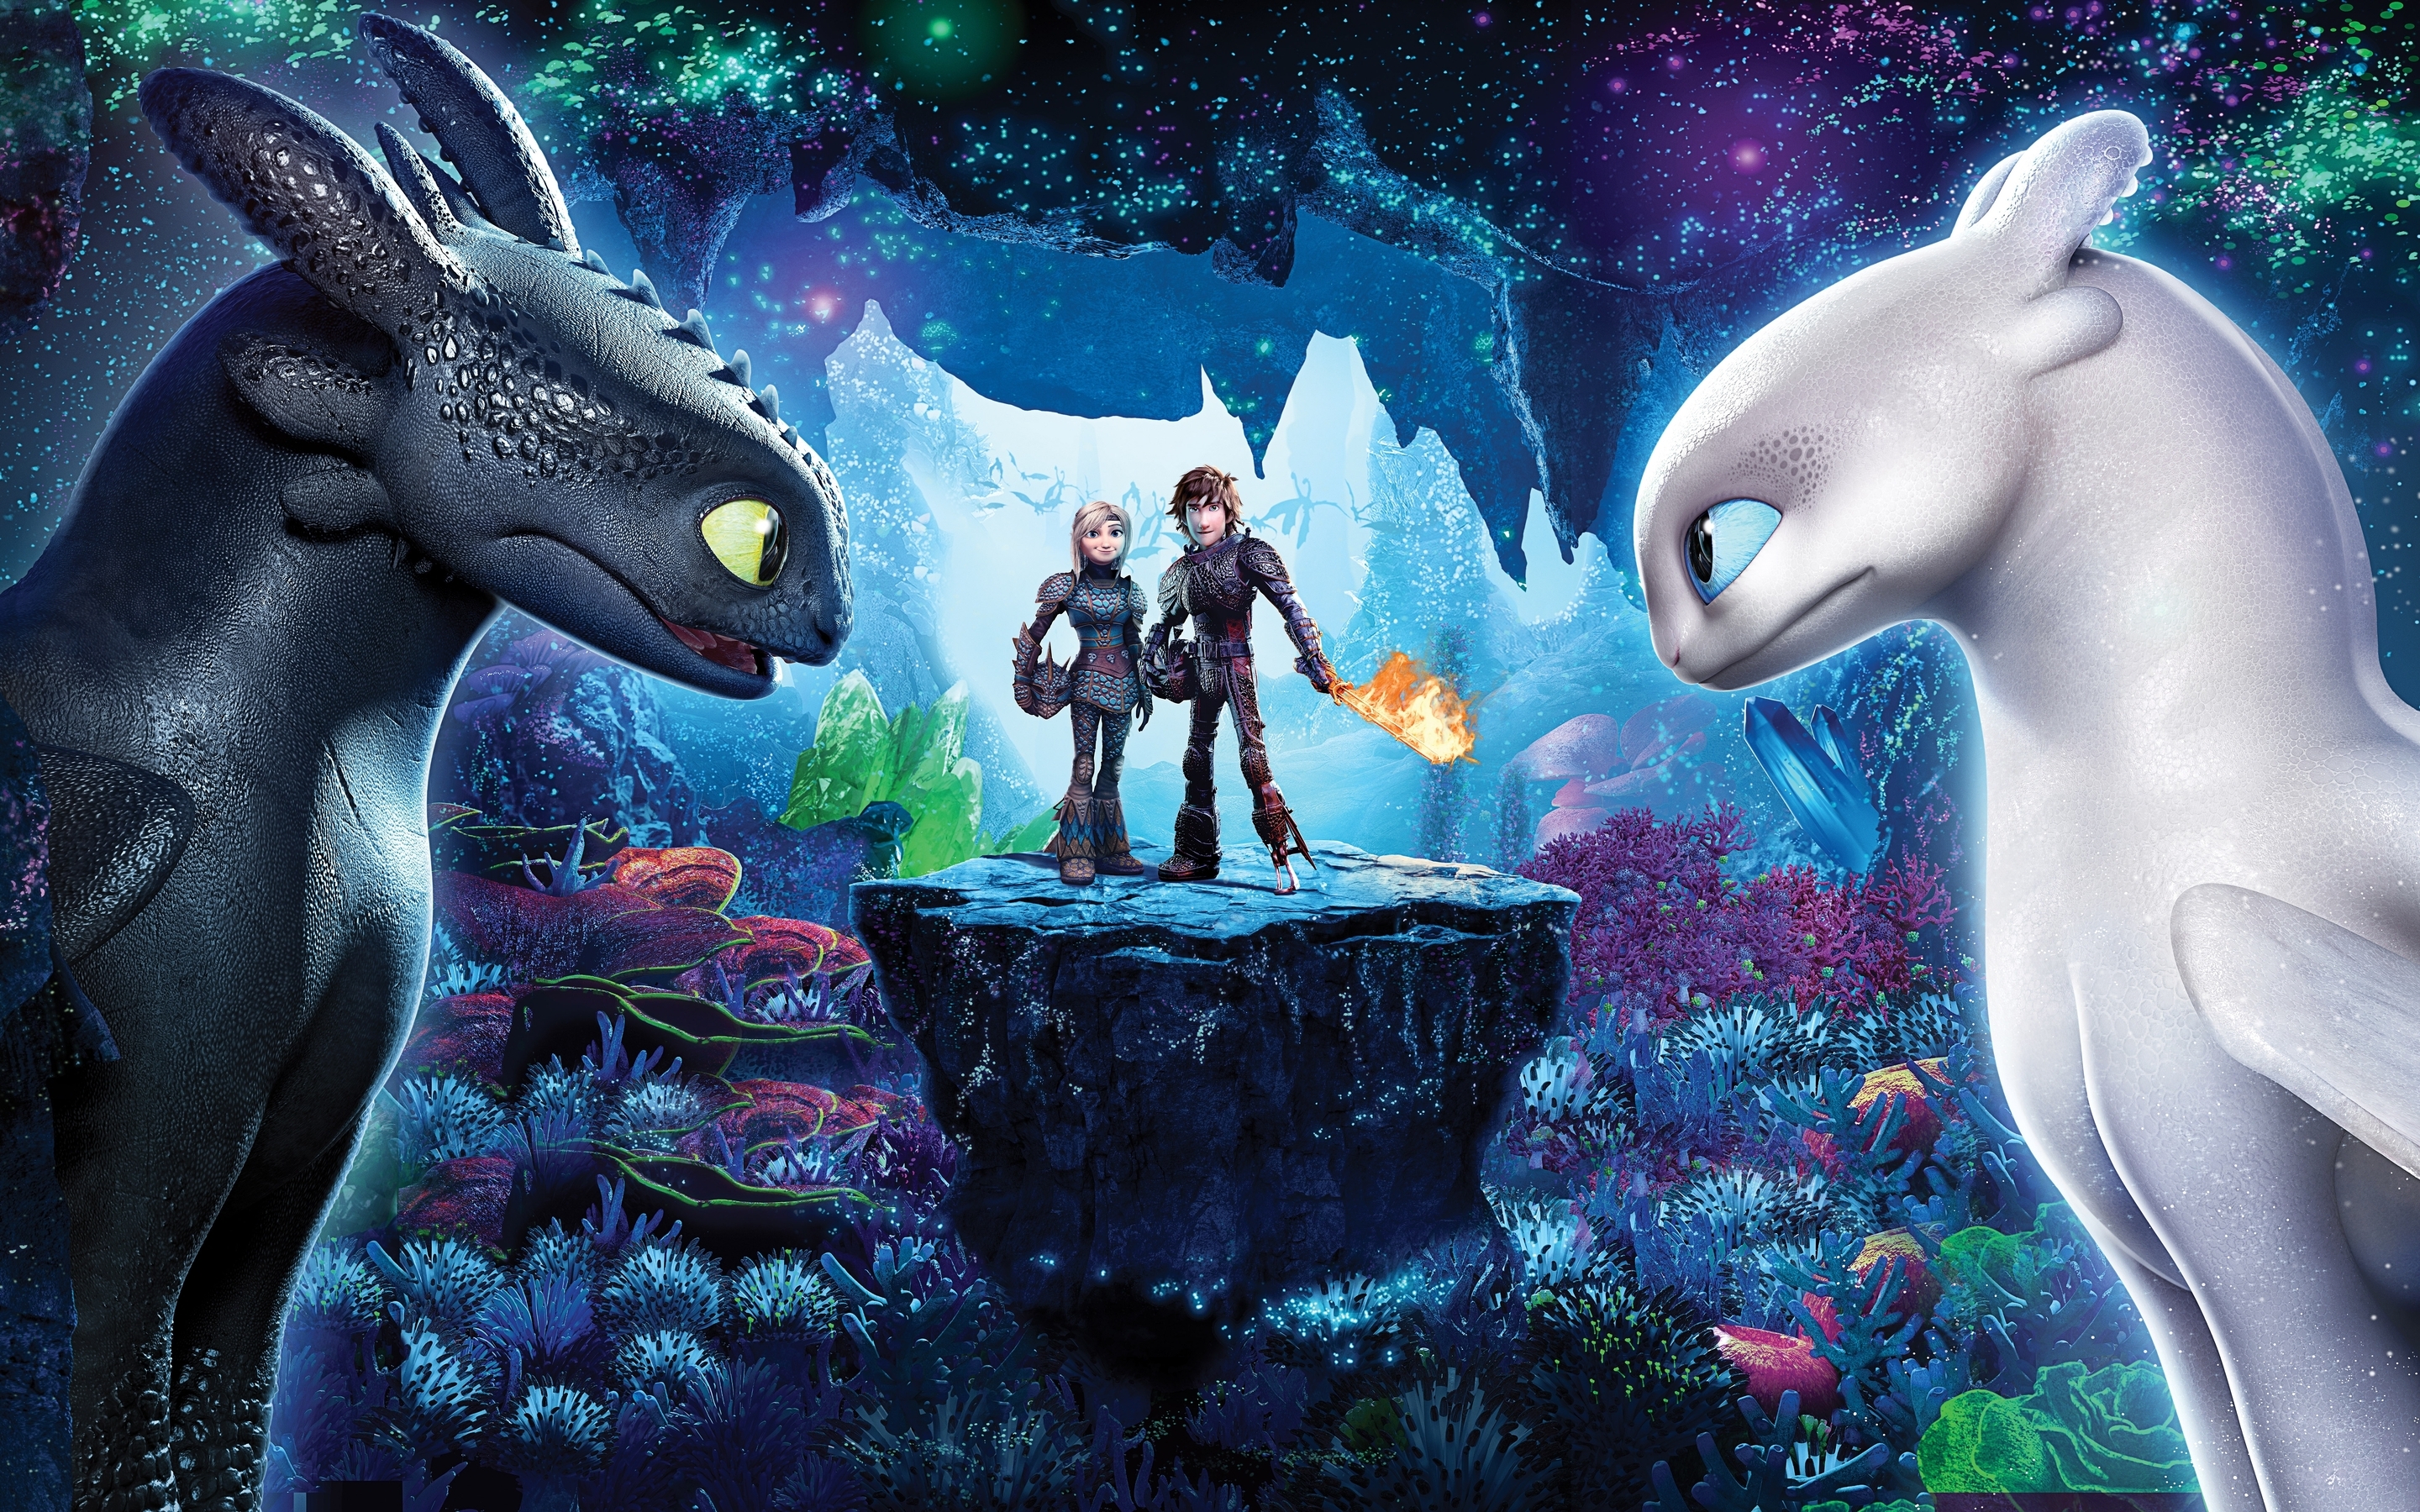 Image: How to train your dragon 3, Hidden world, How to Train Your Dragon: The Hidden World, Night Fury, Day Fury, Toothless, Hiccup, Astrid